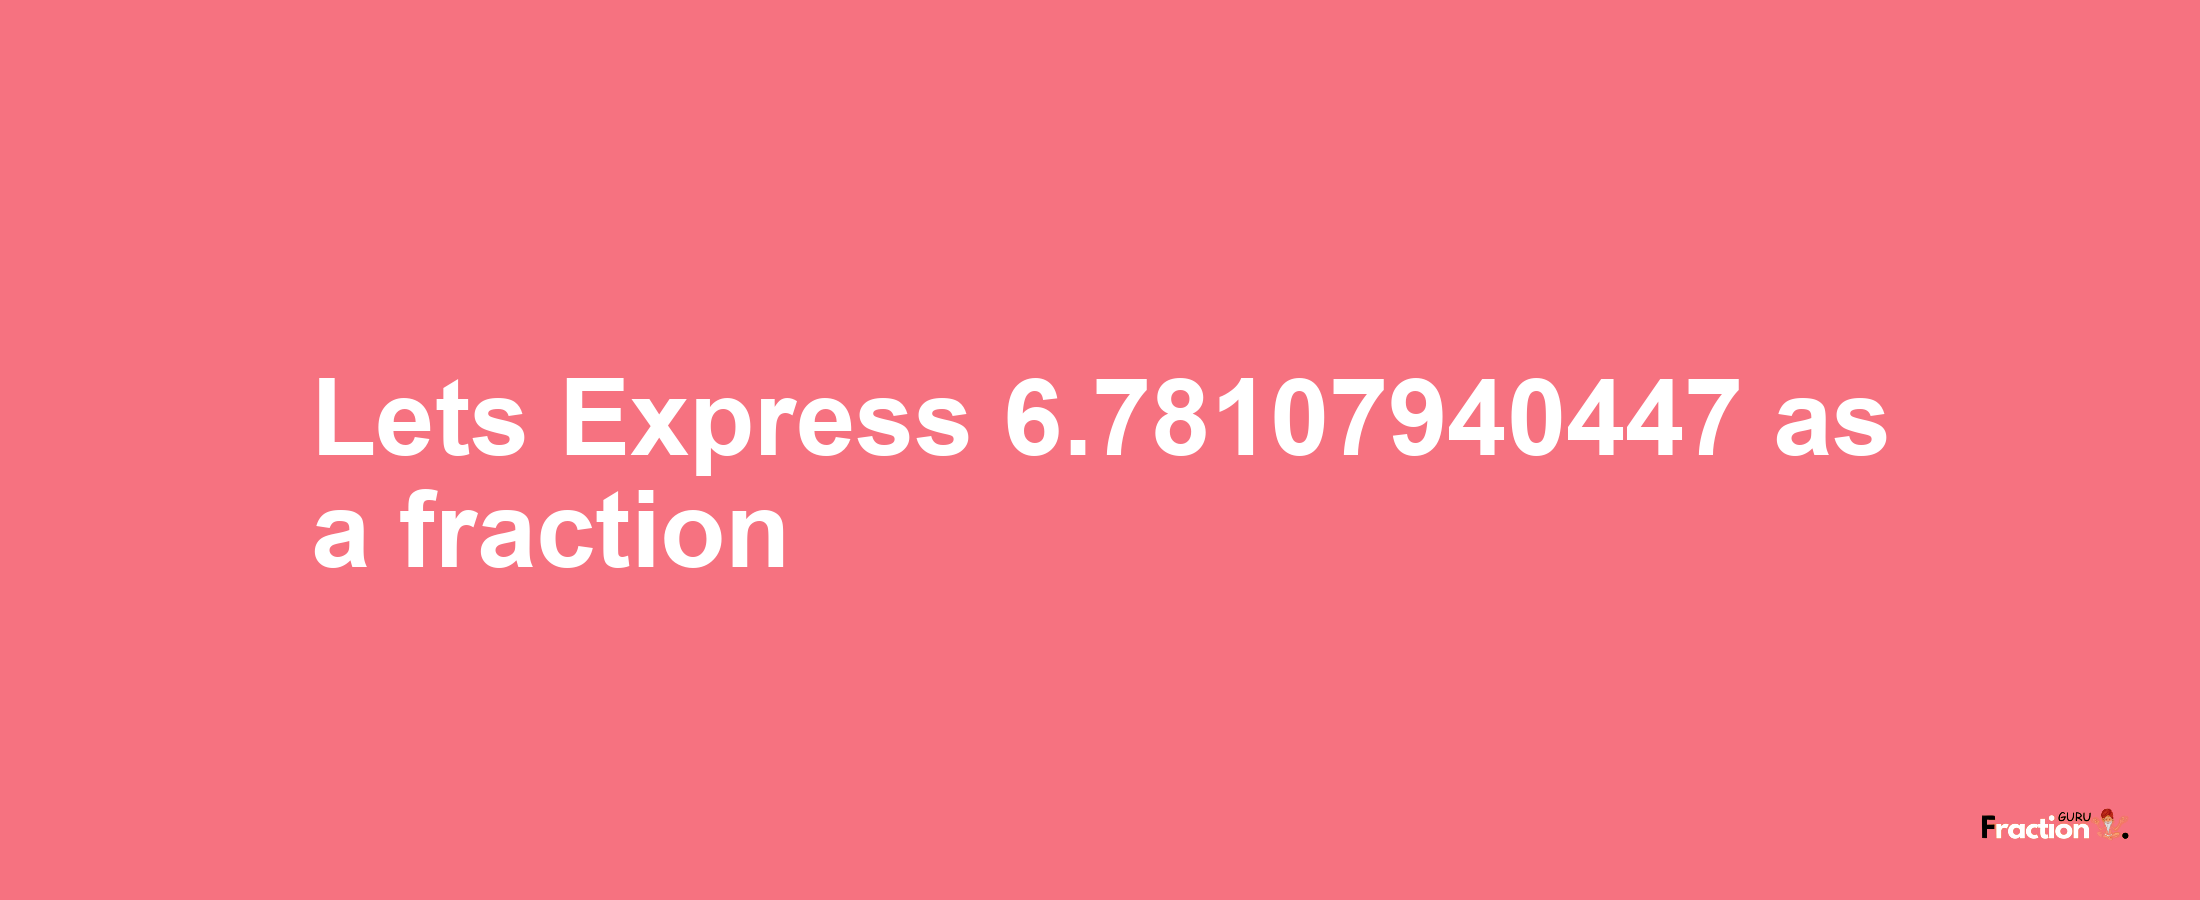 Lets Express 6.78107940447 as afraction